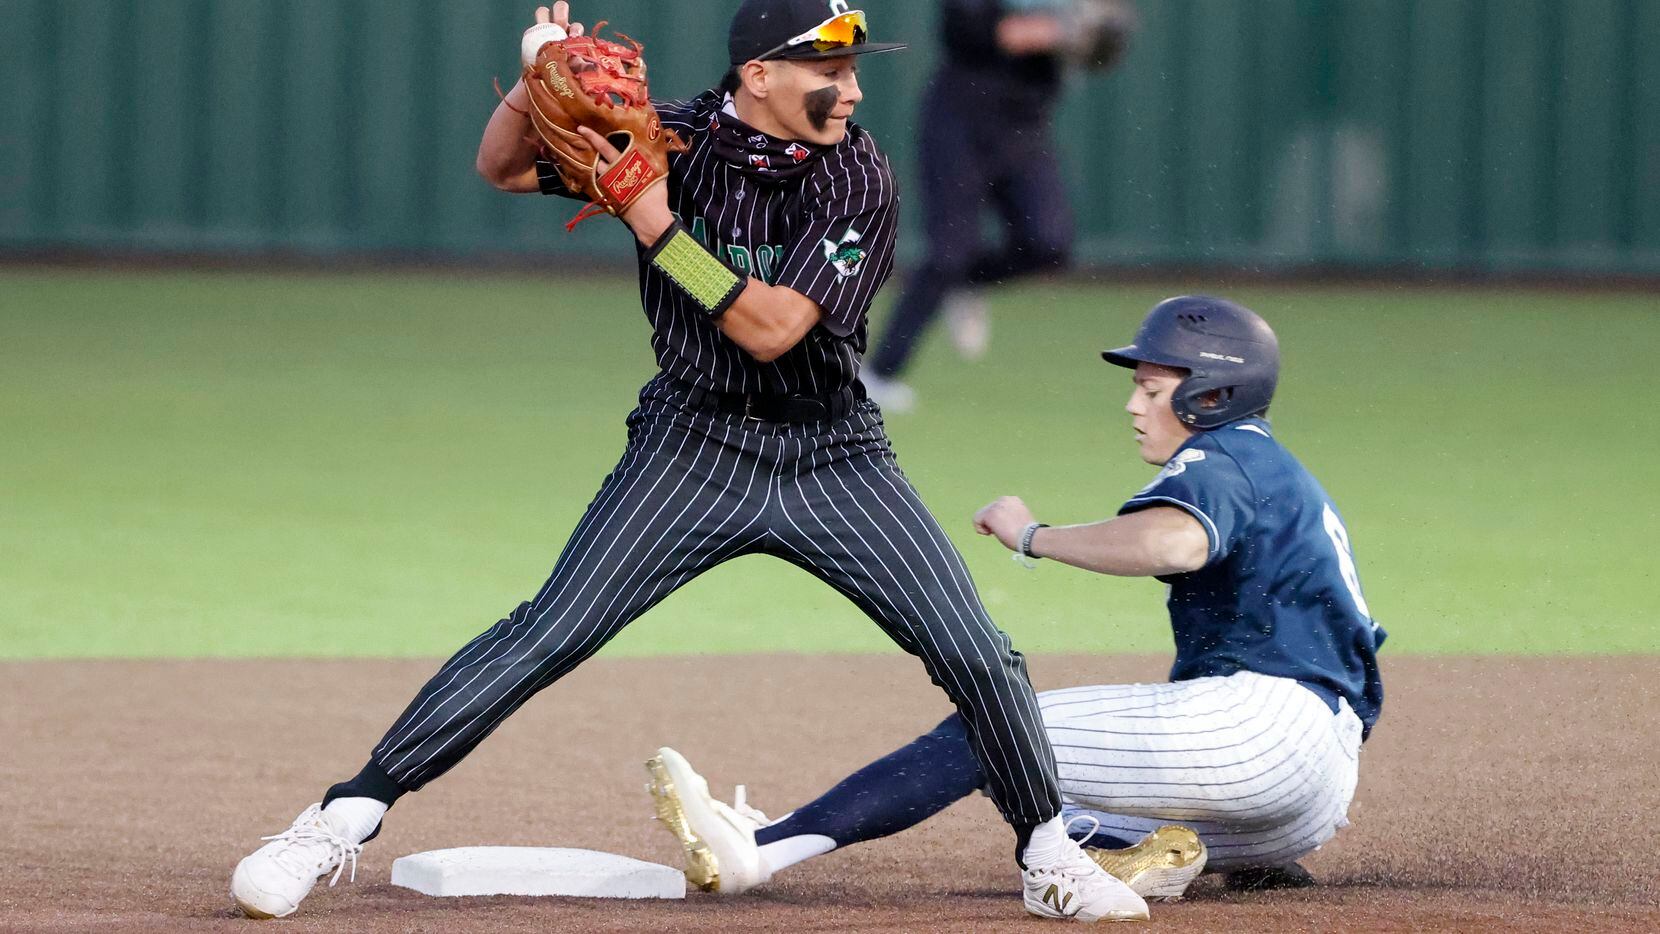 Southlake’s Ethan Mendoza forces out Keller’s Griffin Barton (6) during the fourth inning of their Class District 4-6A baseball game in Souhtlake, Texas on March 19, 2021. (Michael Ainsworth/Special Contributor)